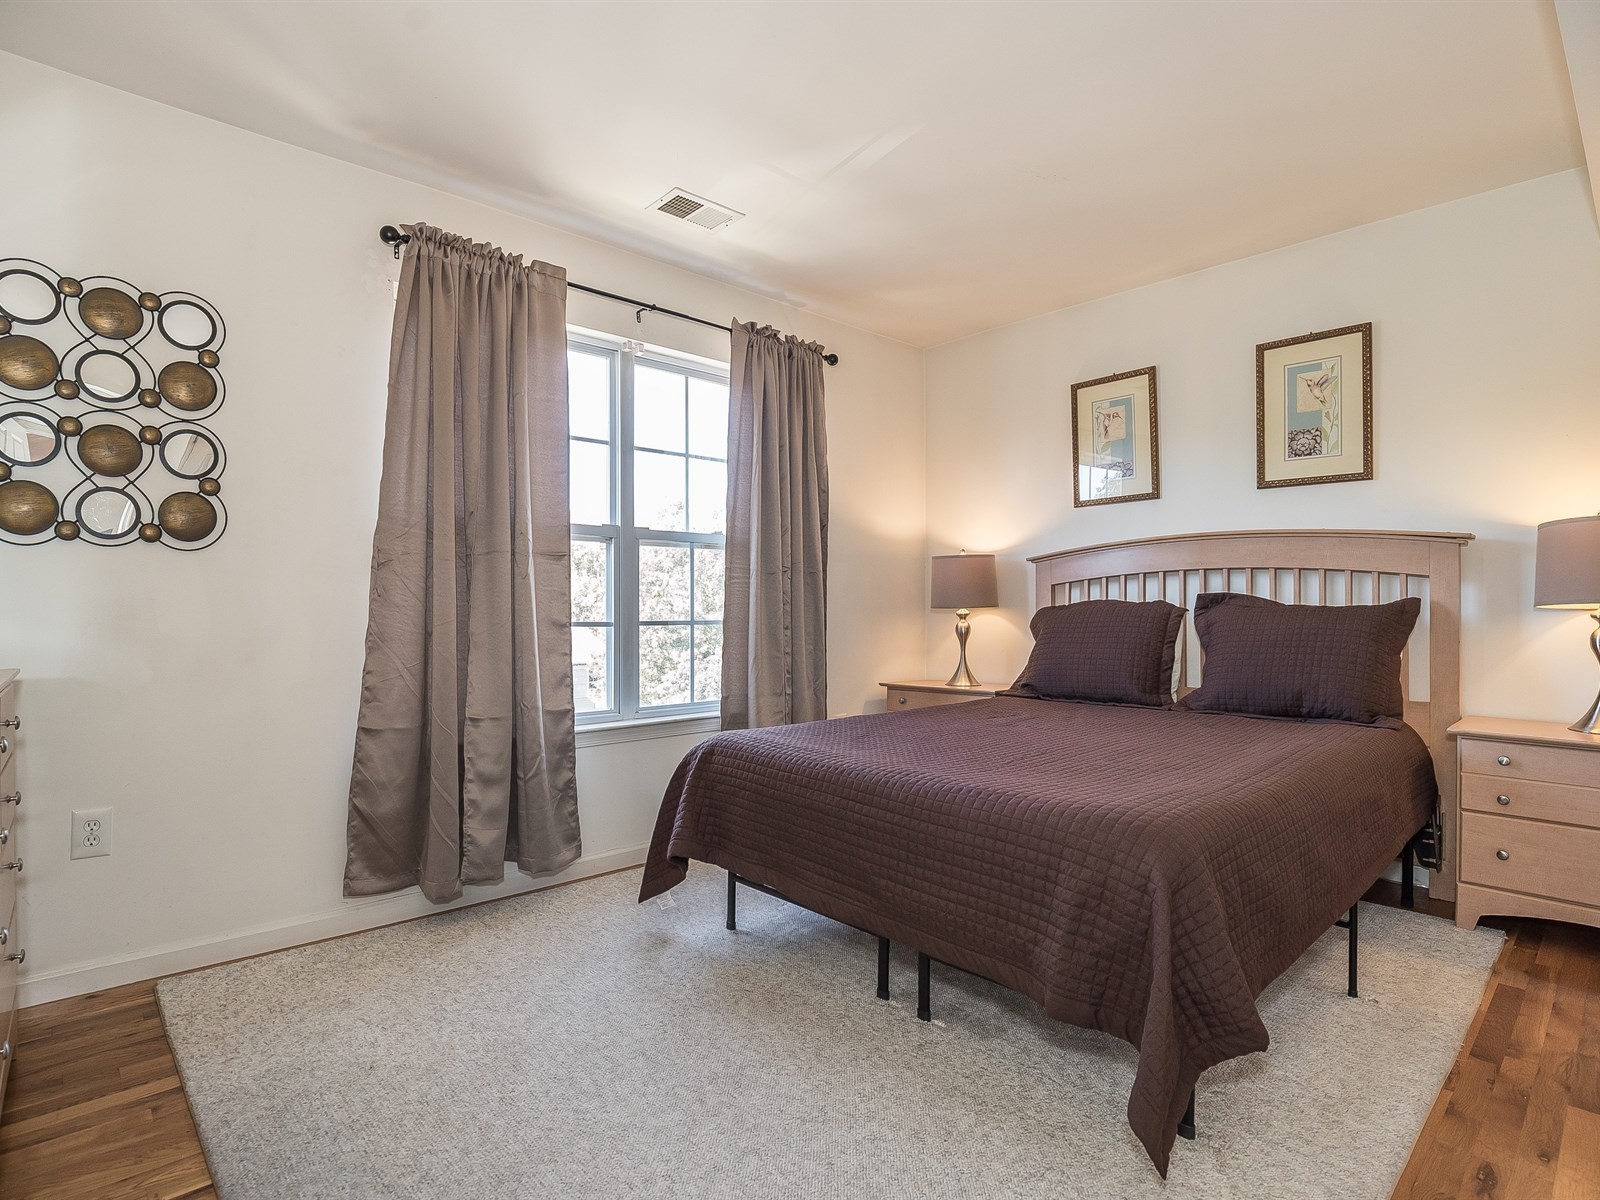 Furnished Apartment South Brunswick 631 master bedroom with king sized bed and nightstands